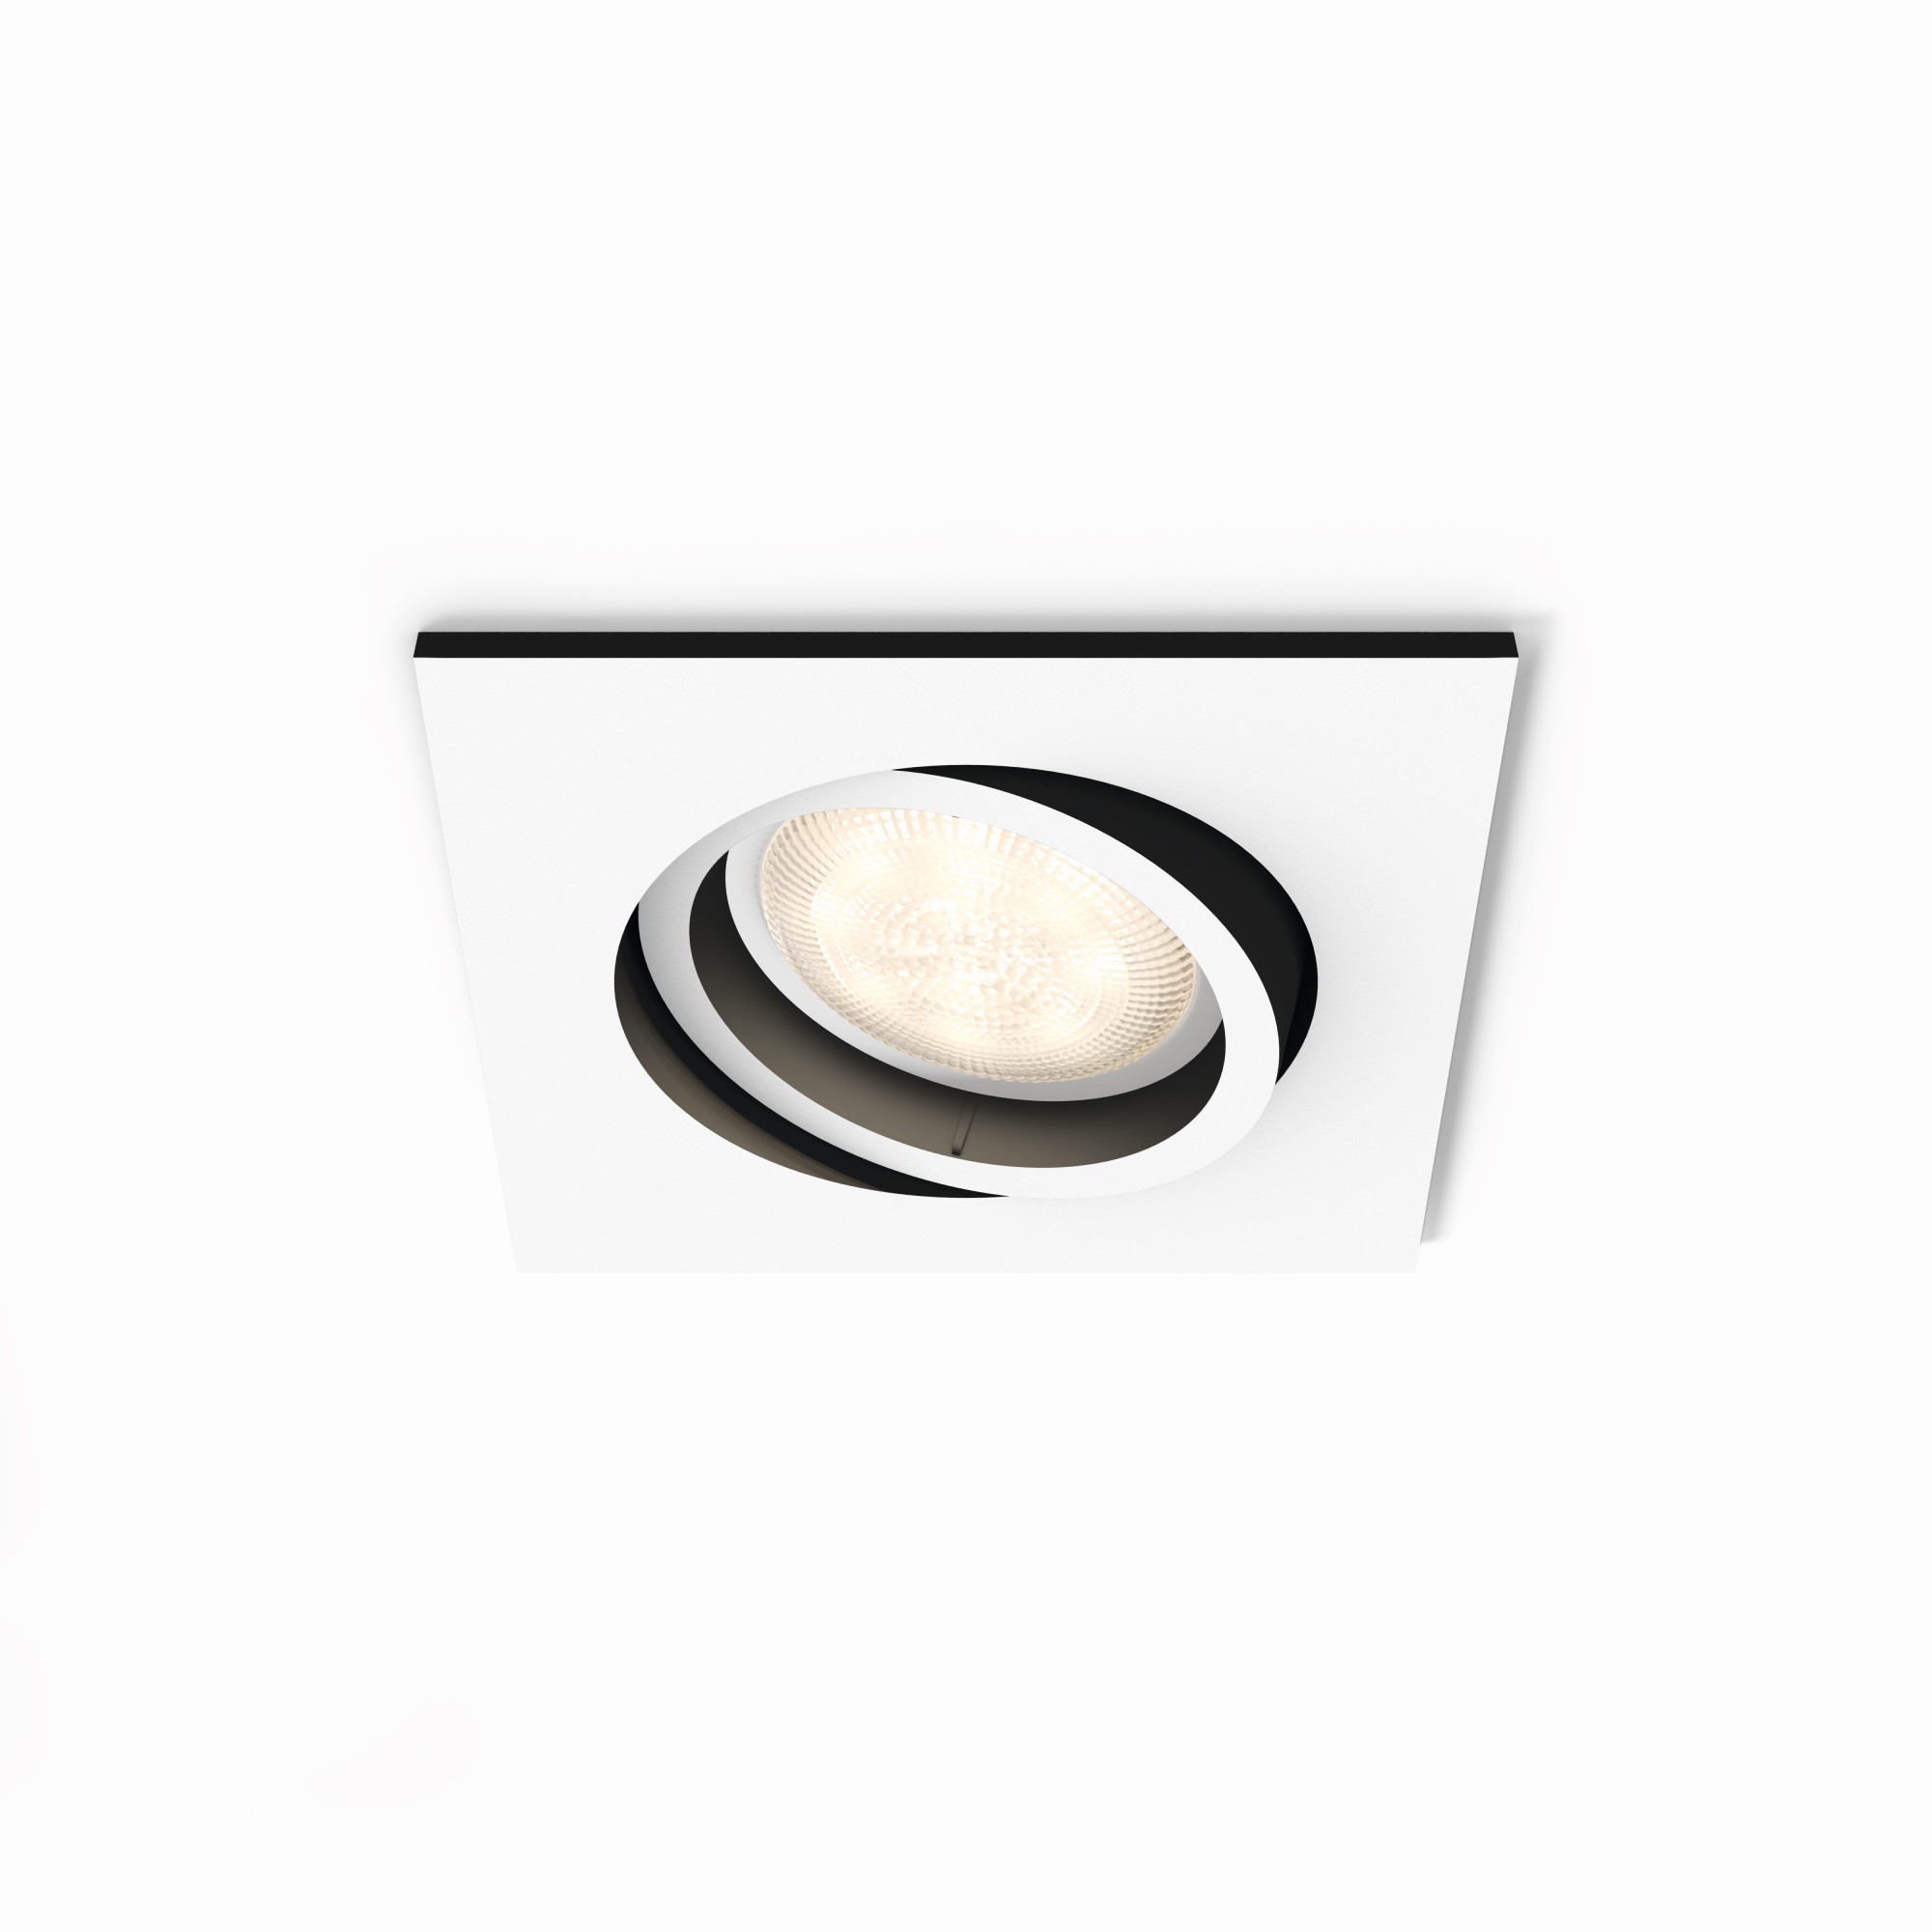 Philips Hue White Ambiance Milliskin LED Downlight square, white, 250lm, with Dimmer Switch